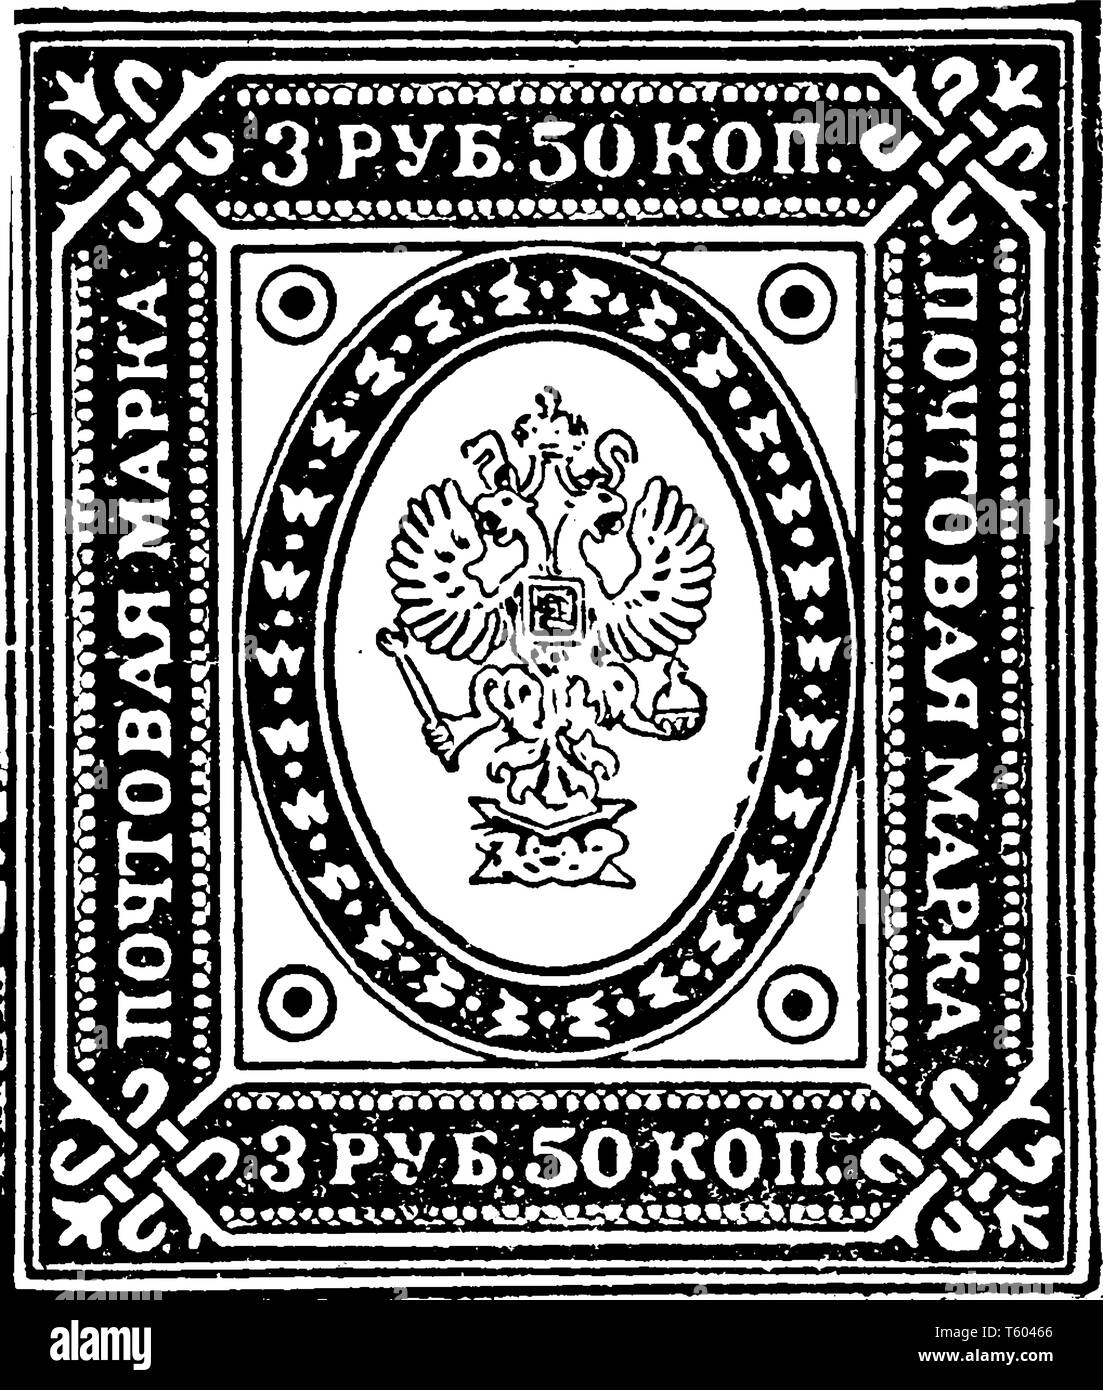 Finland 3 P 50 K Stamp in 1891 issue of three Finnish first class stamps drawn by and celebrating the work of Finnish artist Tom of Finland, vintage l Stock Vector